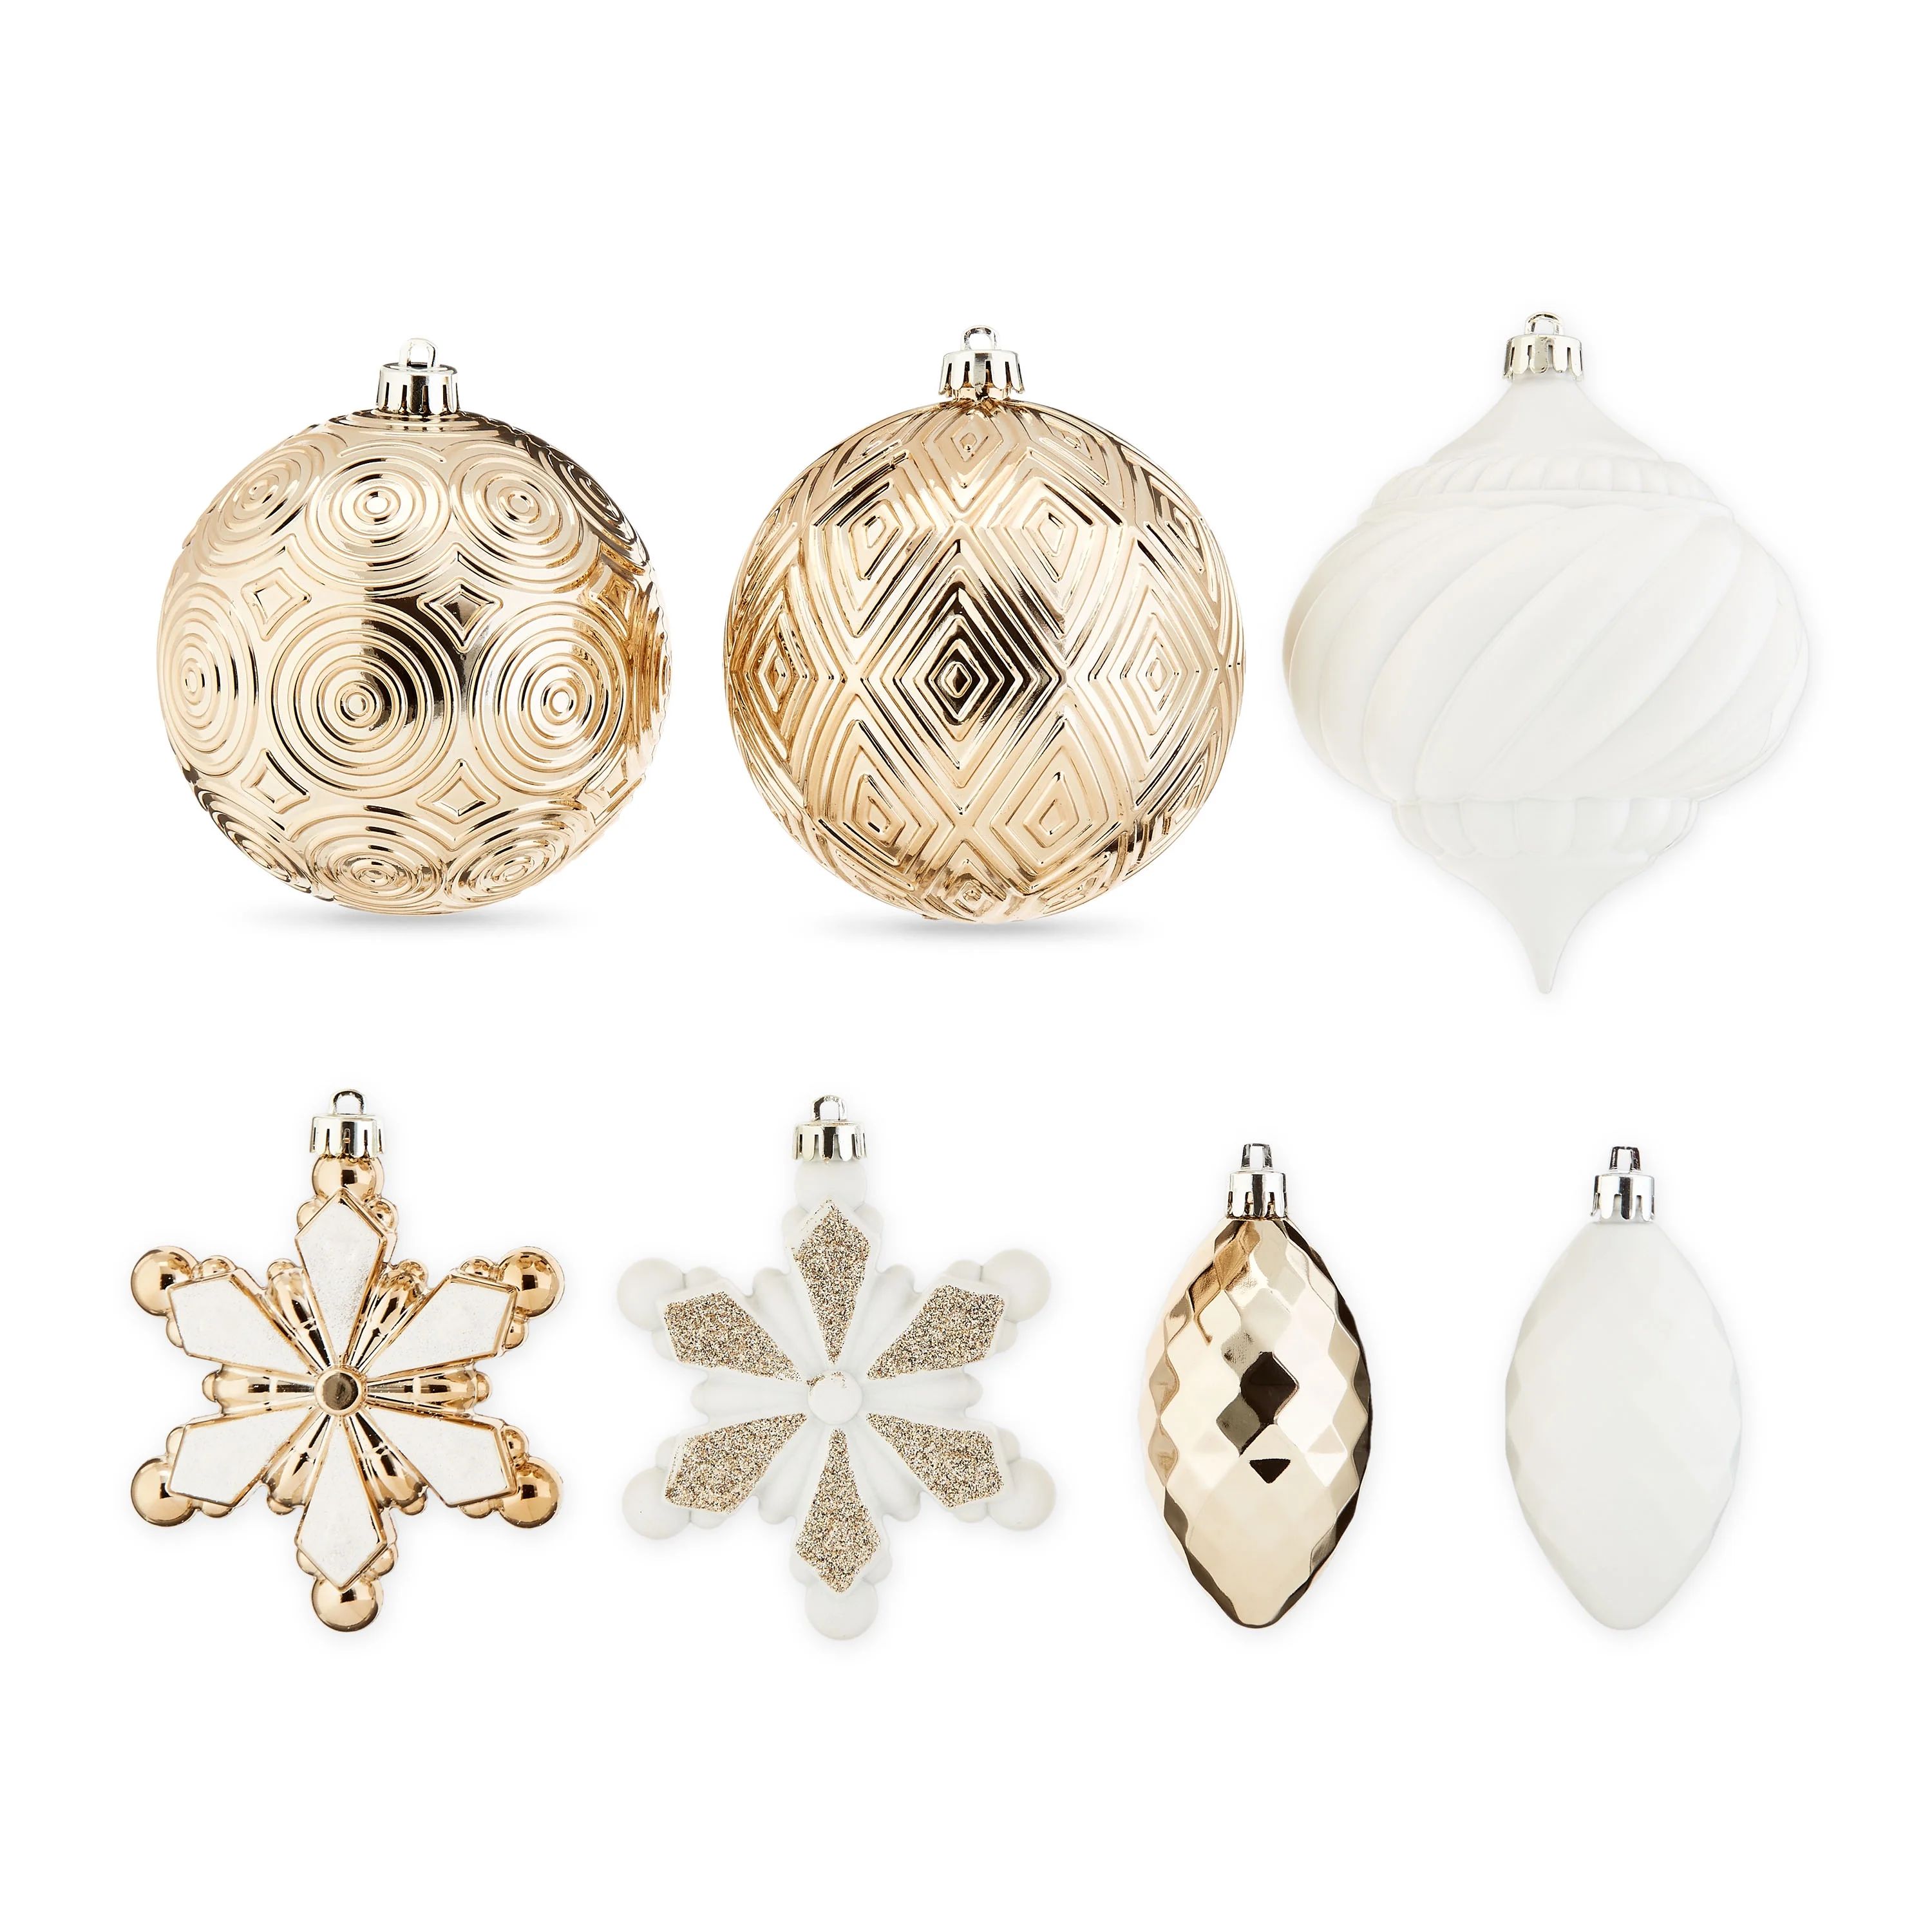 Holiday Time 100 mm Shatterproof Christmas Ornaments, White & Champagne Gold, 18 Count | Walmart (US)